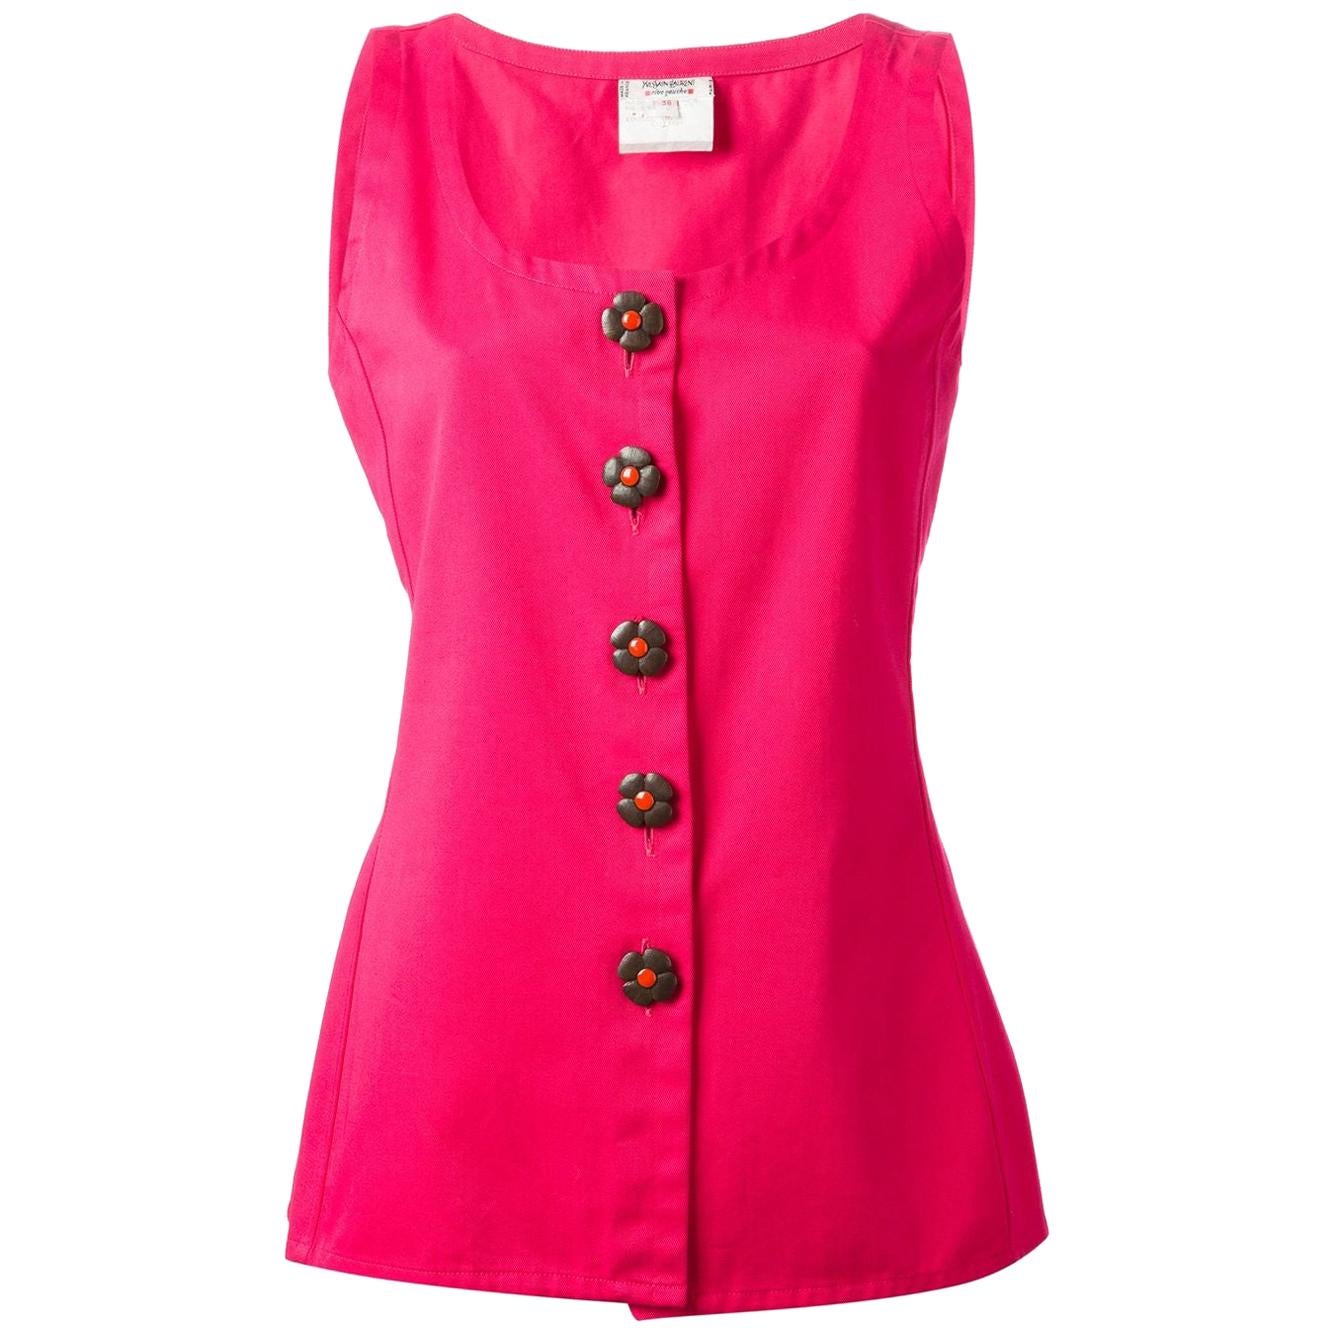 Yves Saint Laurent Red Pink Top